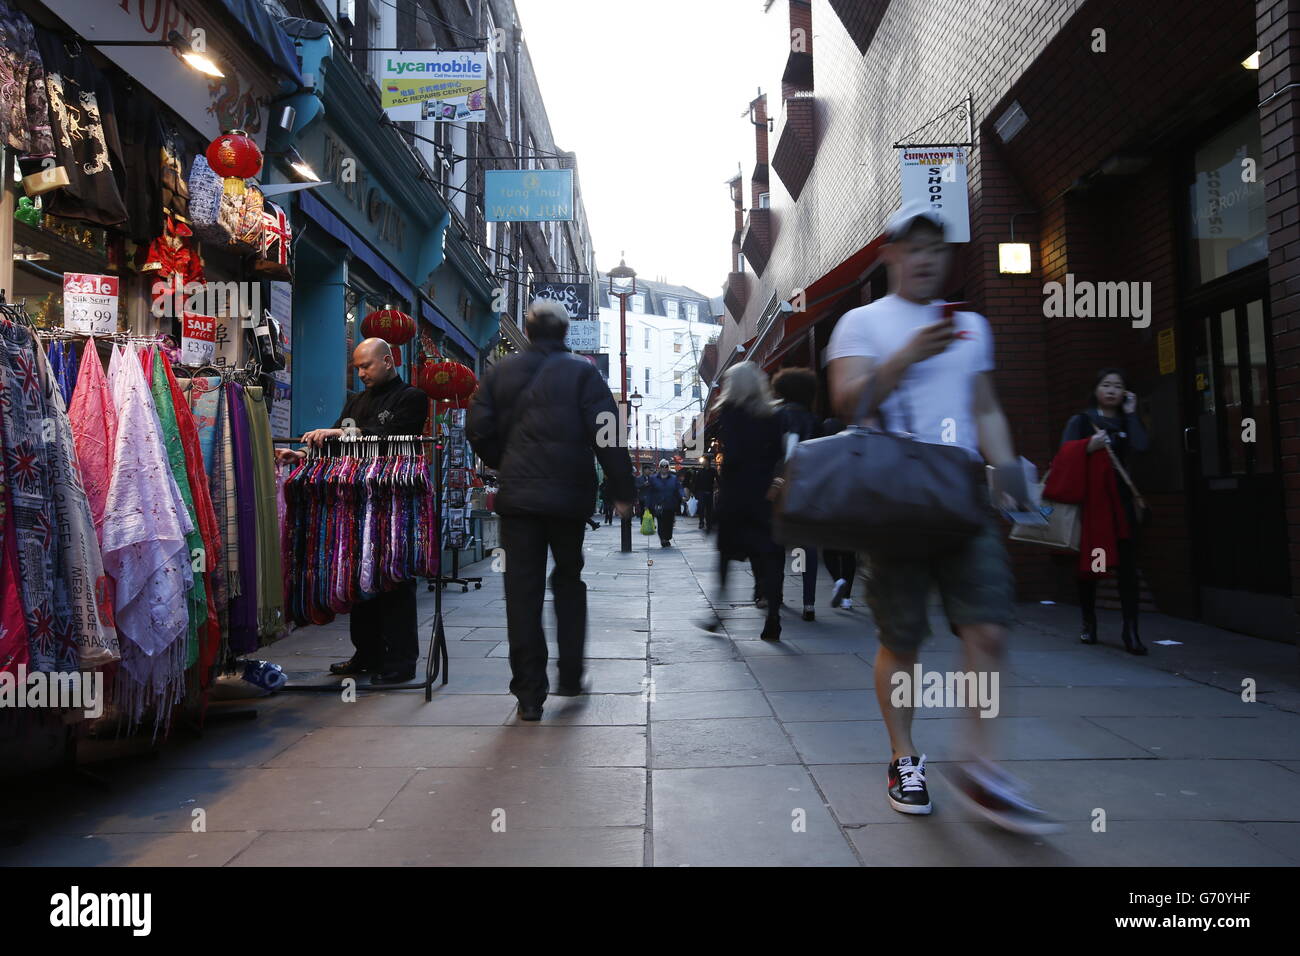 Theatre stock. Chinatown in central London. Stock Photo